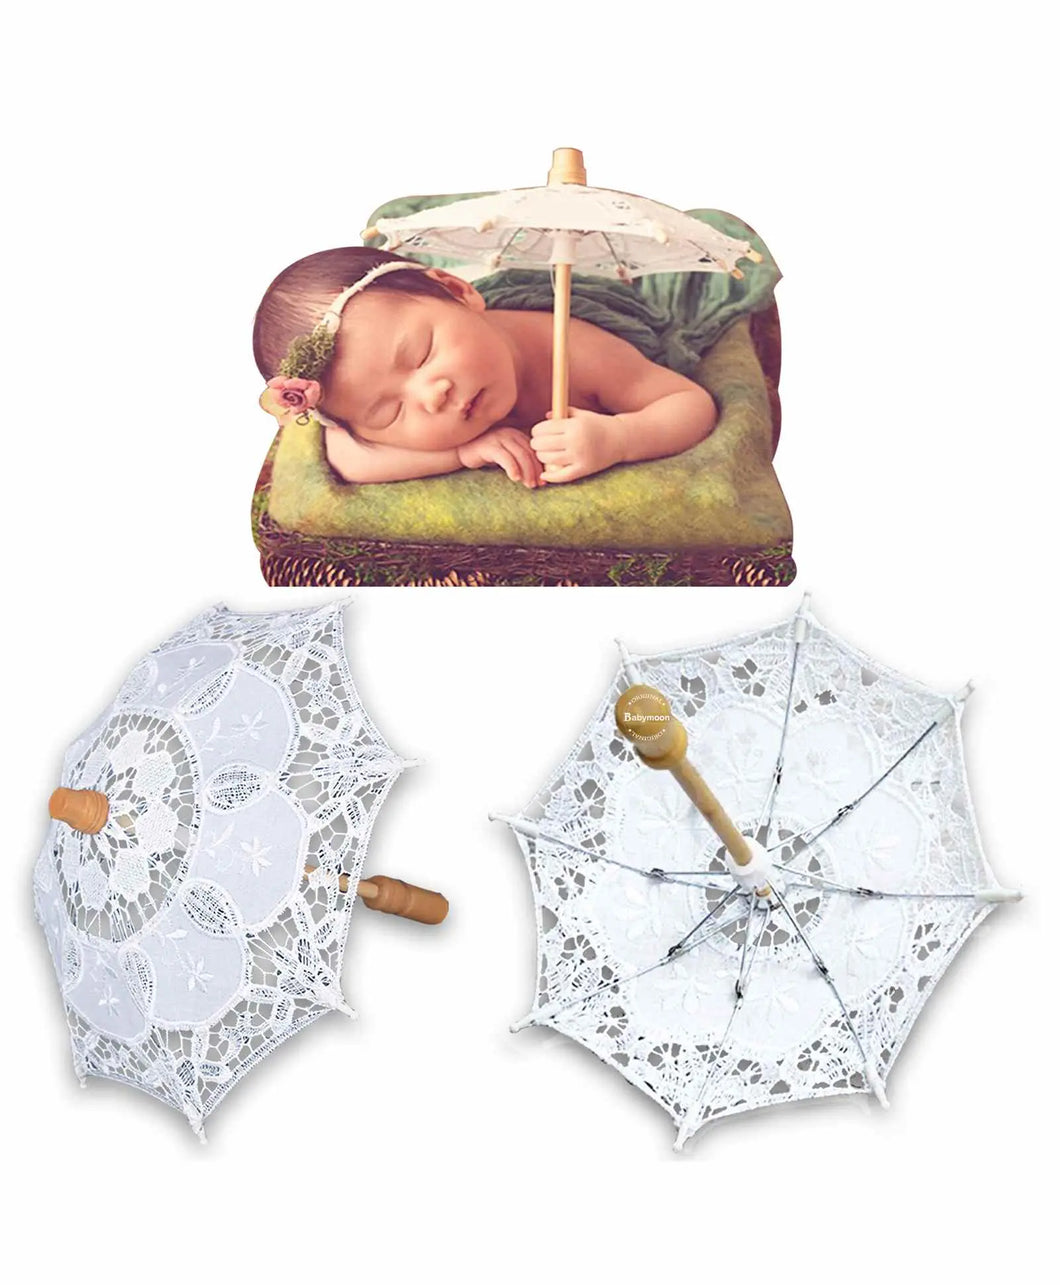 Babymoon Wooden Crafted Umbrella Photoshoot Prop - White